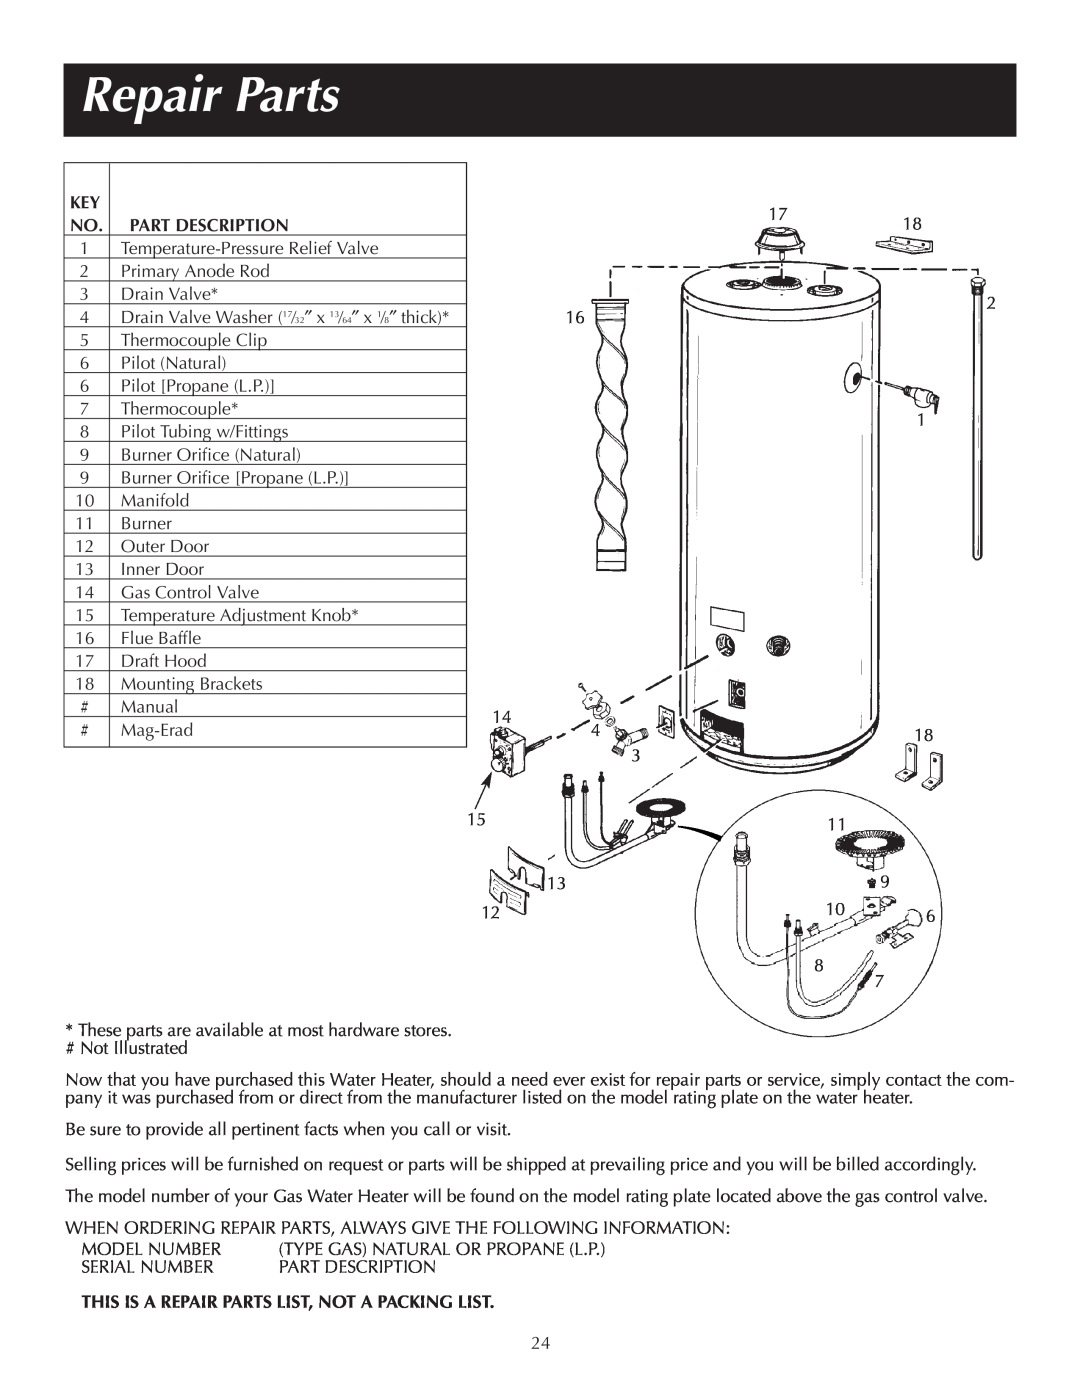 Reliance Water Heaters 184123-000 instruction manual Part Description, This Is A Repair Parts List, Not A Packing List 